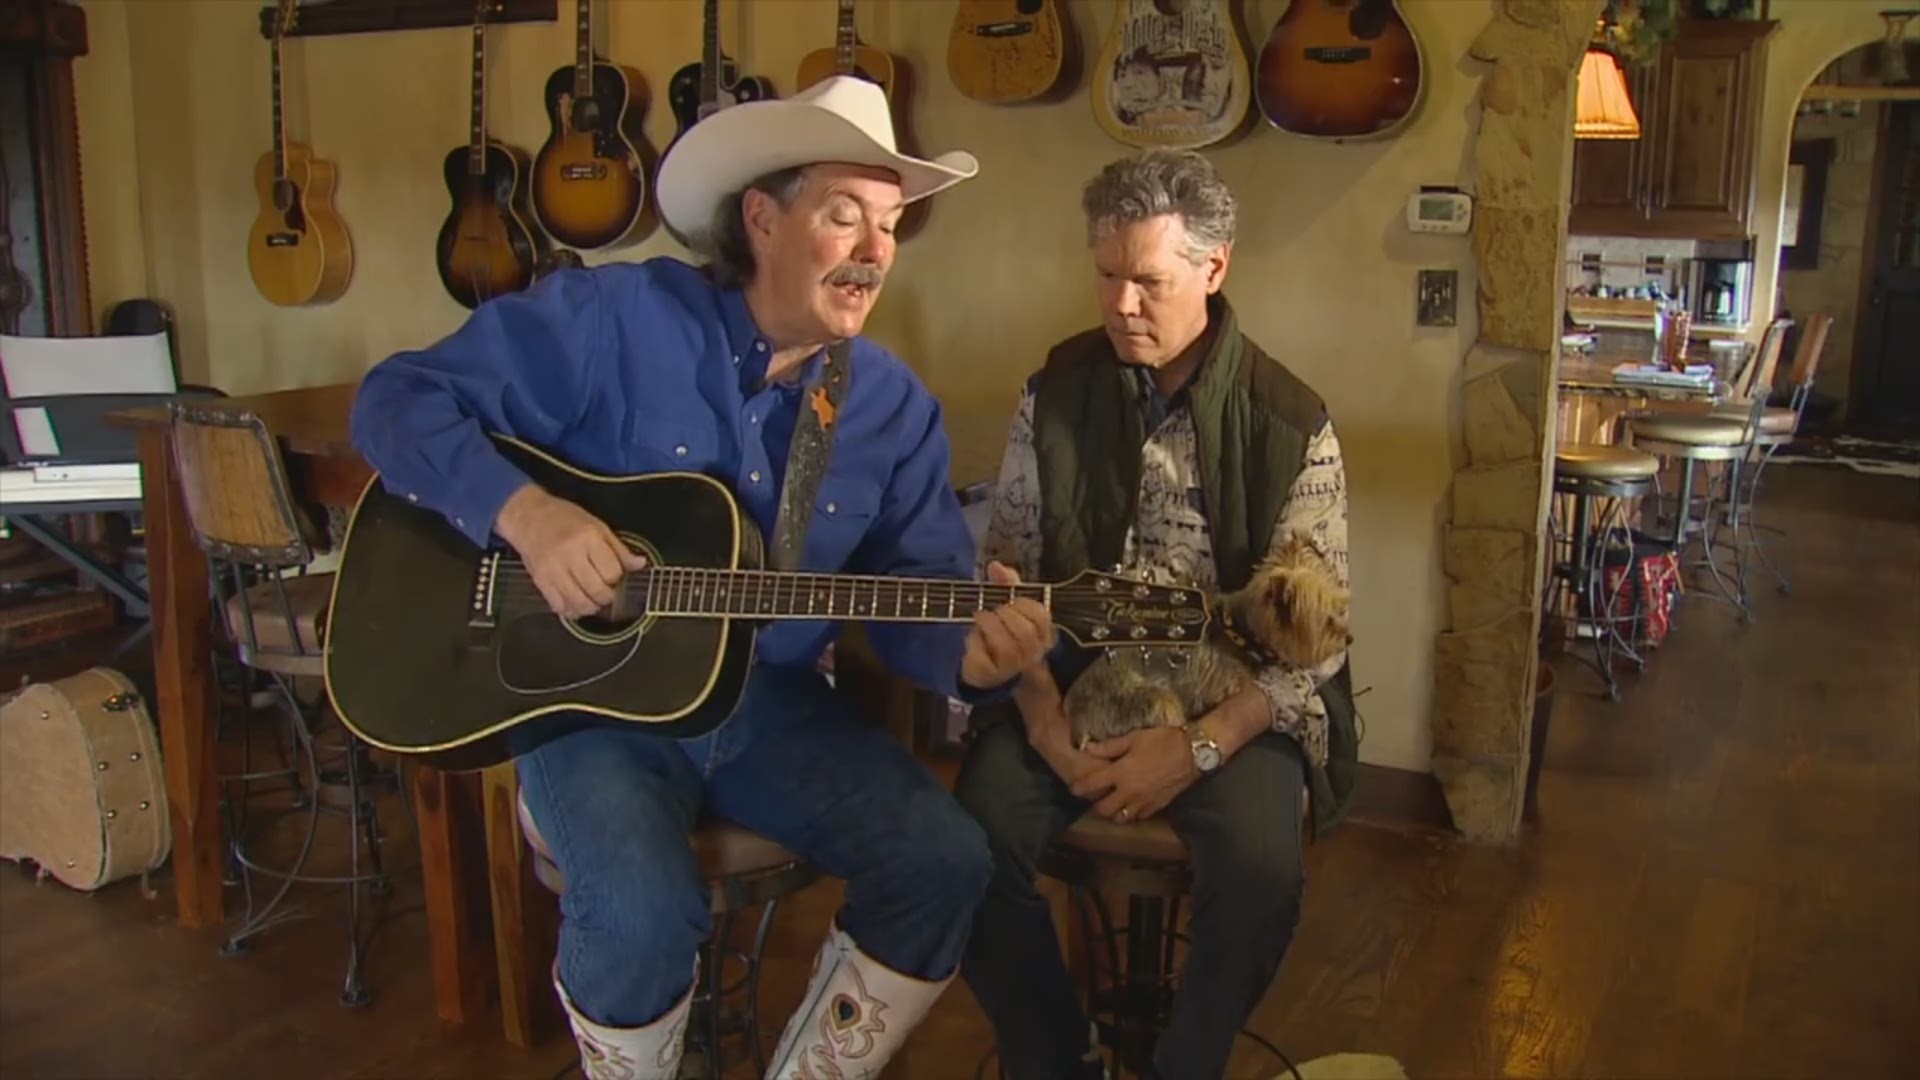 Randy Travis suffered a massive stroke in 2013. WFAA reporter Jobin Panicker sat down with the country legend in 2017 to talk about how the singer has been fighting to regain his health and his voice.